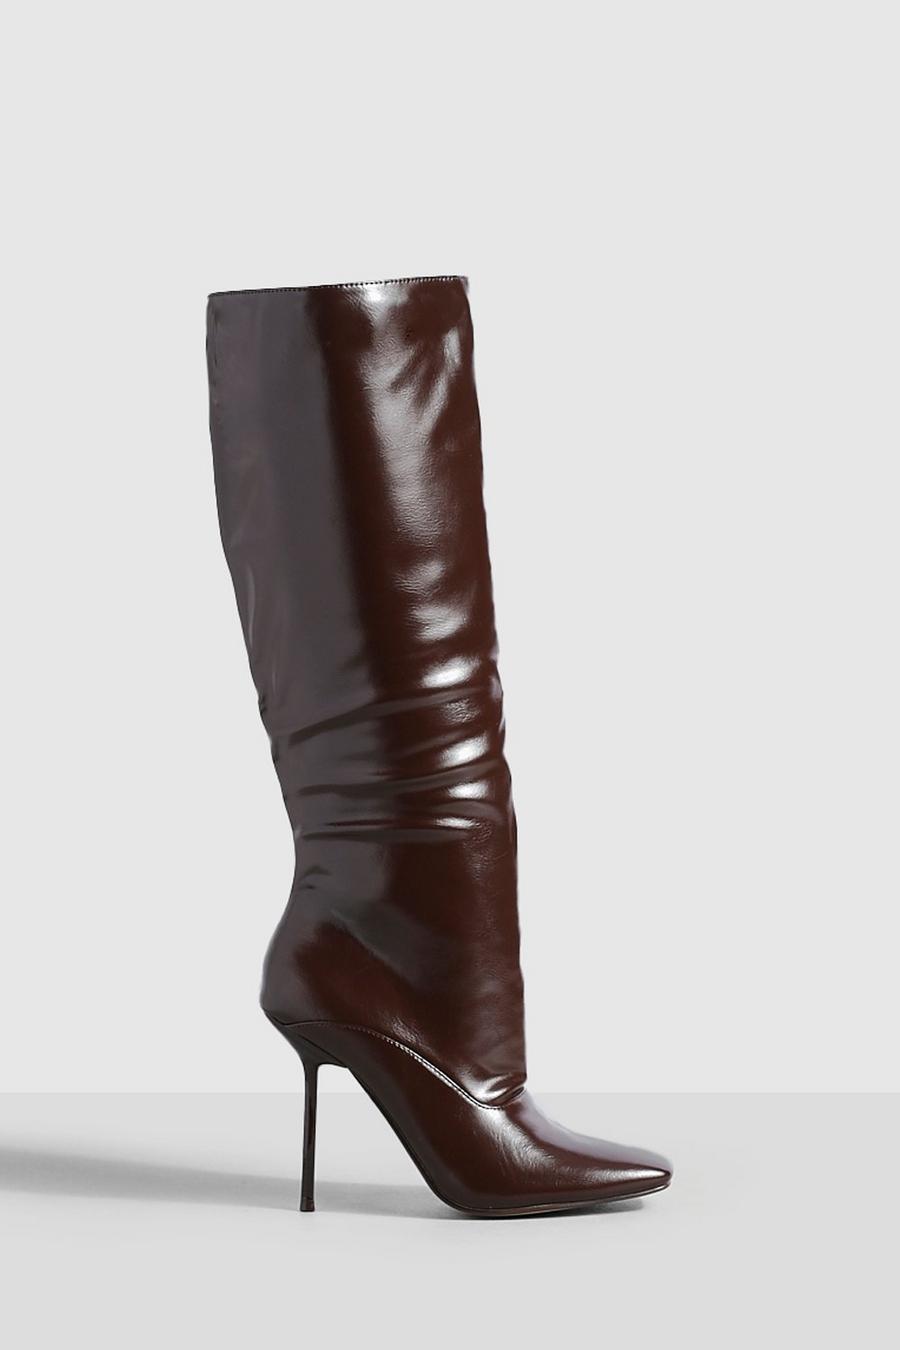 Chocolate brown Square Toe Stilleto Knee High Boots